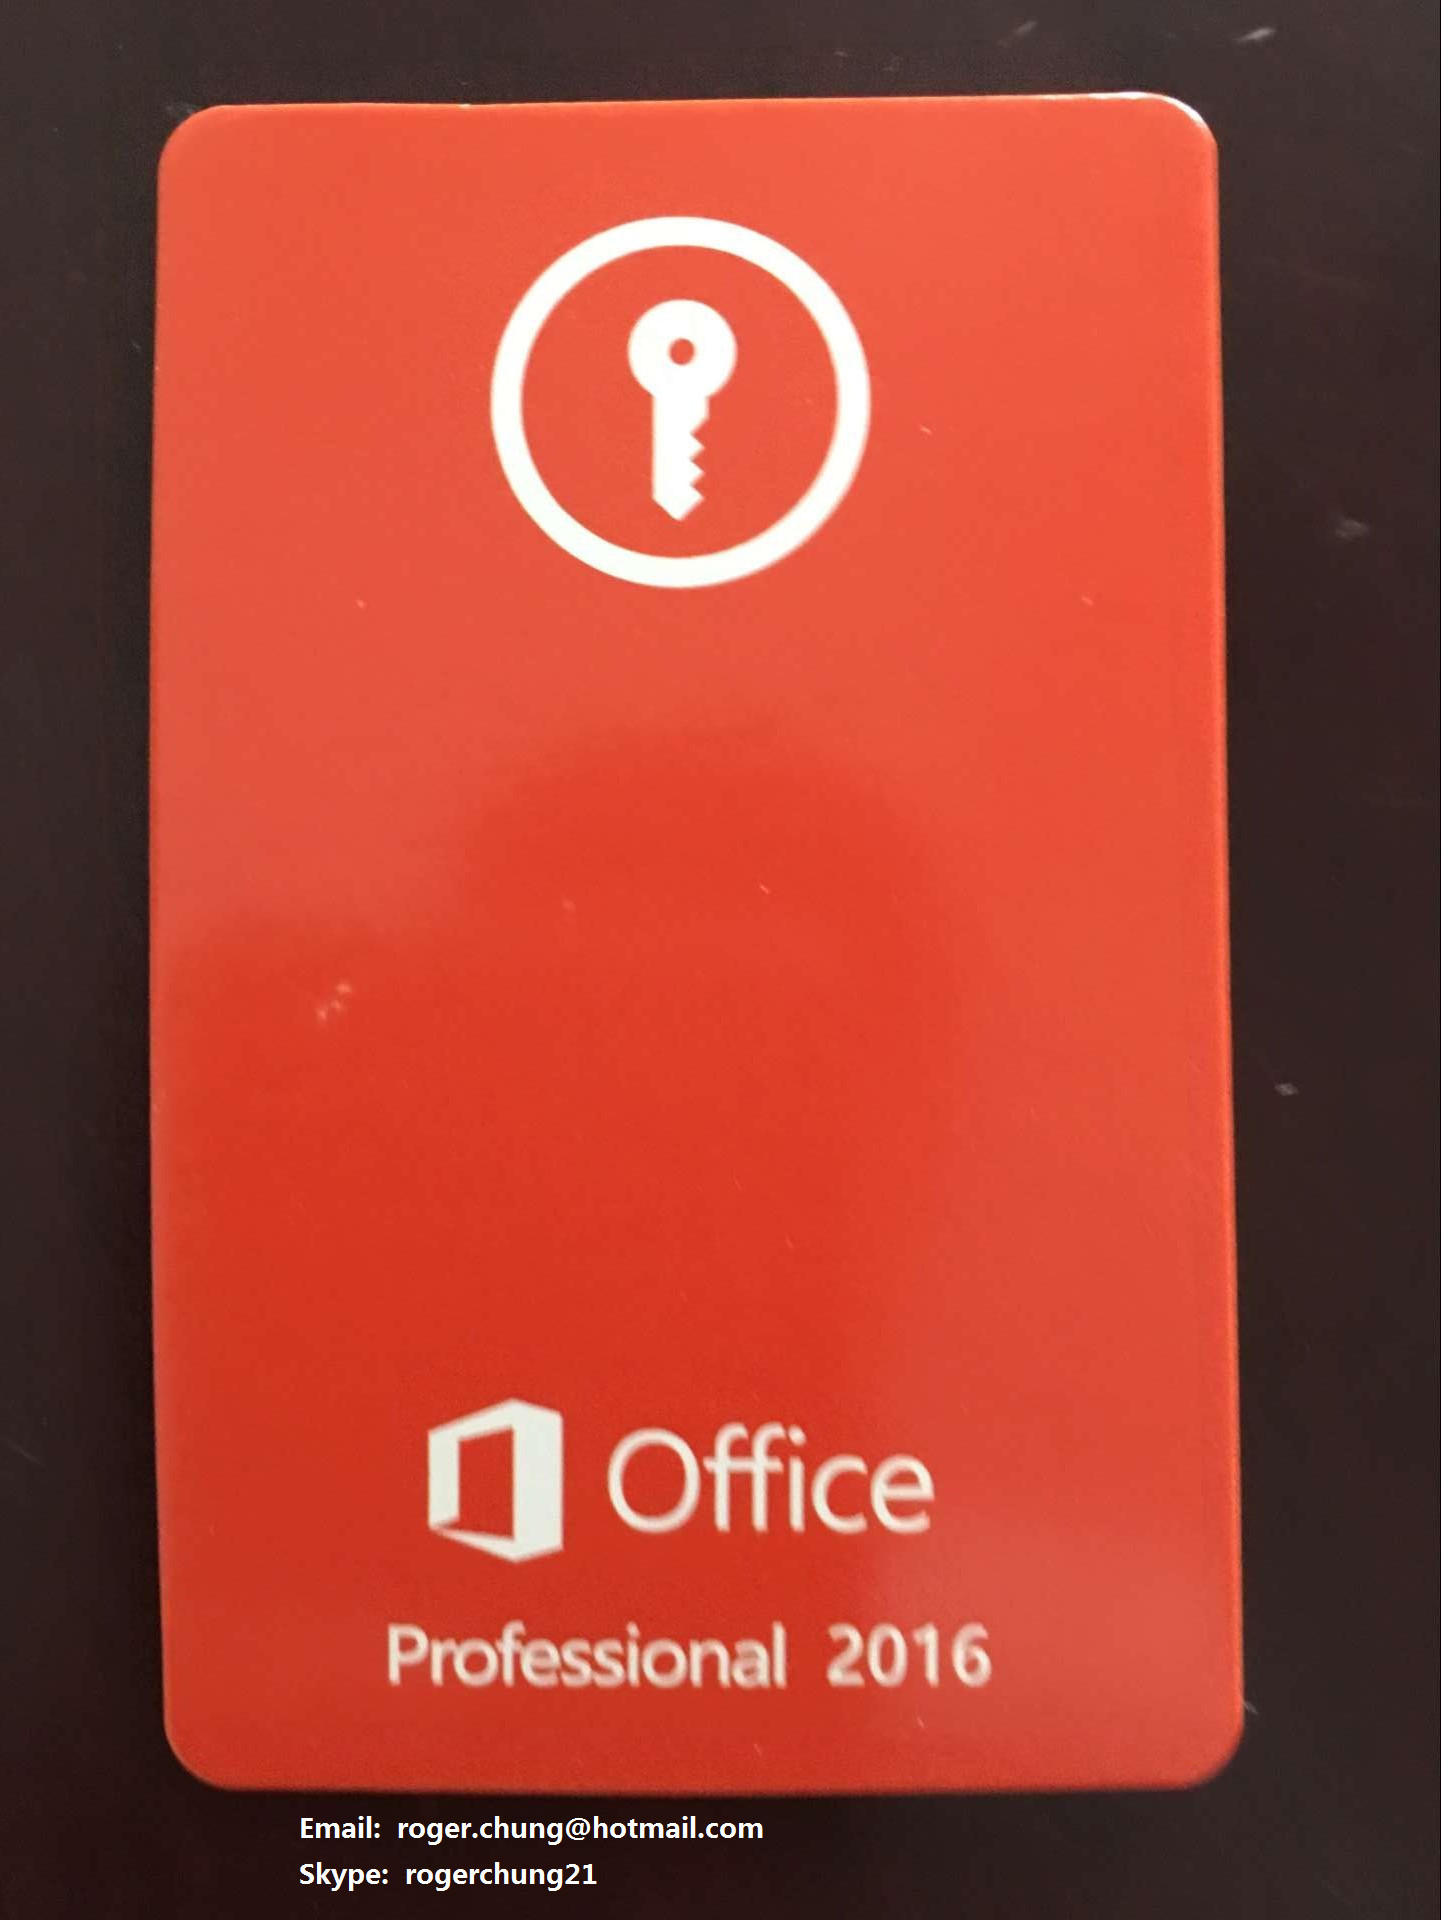 Fast delivery Microsoft Office 2016 Professional Product Key Cards free shipping